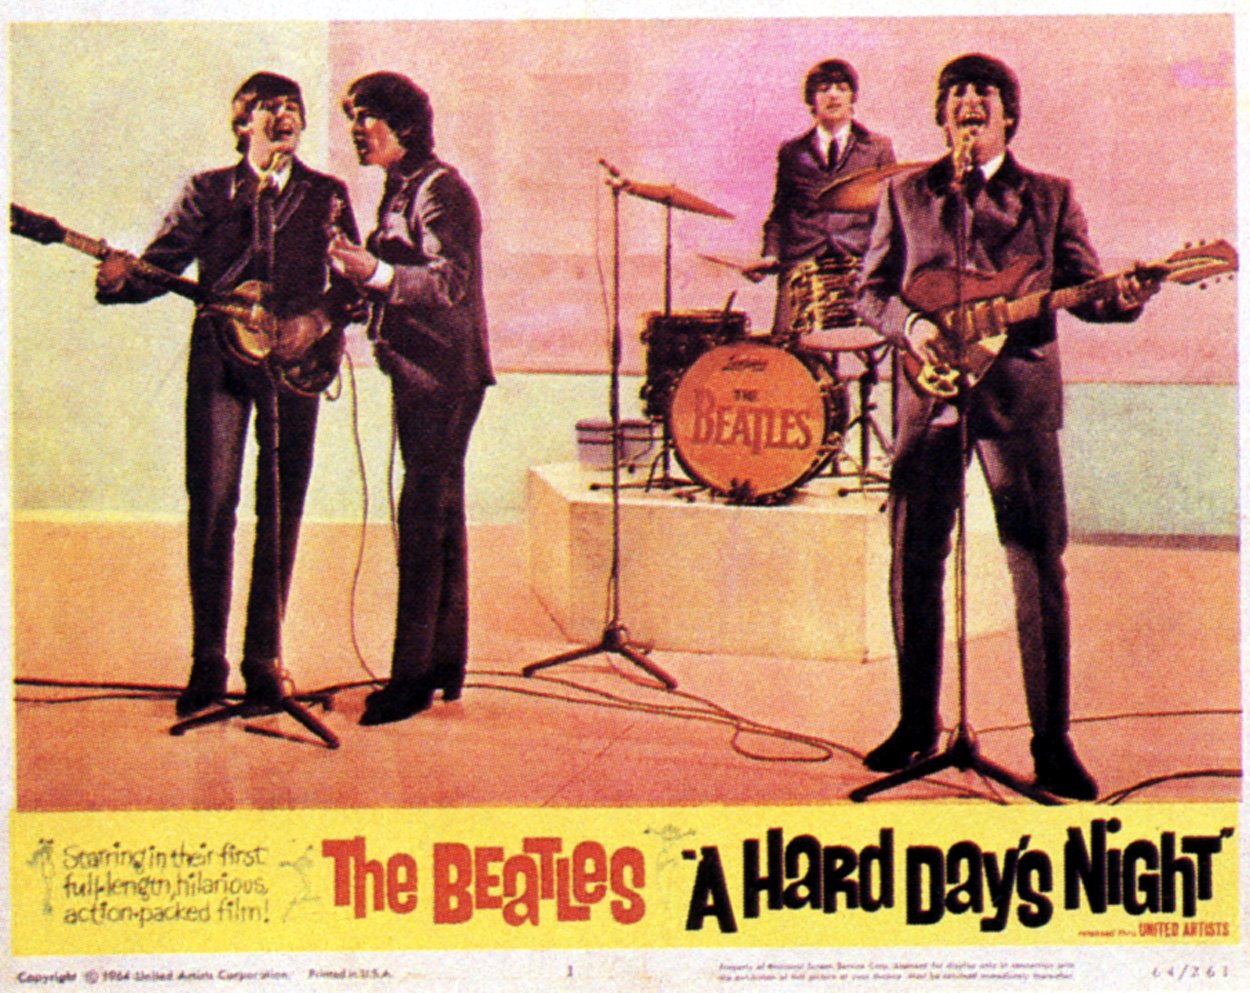 A promotional poster for The Beatles 1964 film 'A Hard Day's Night' shows the band performing on stage